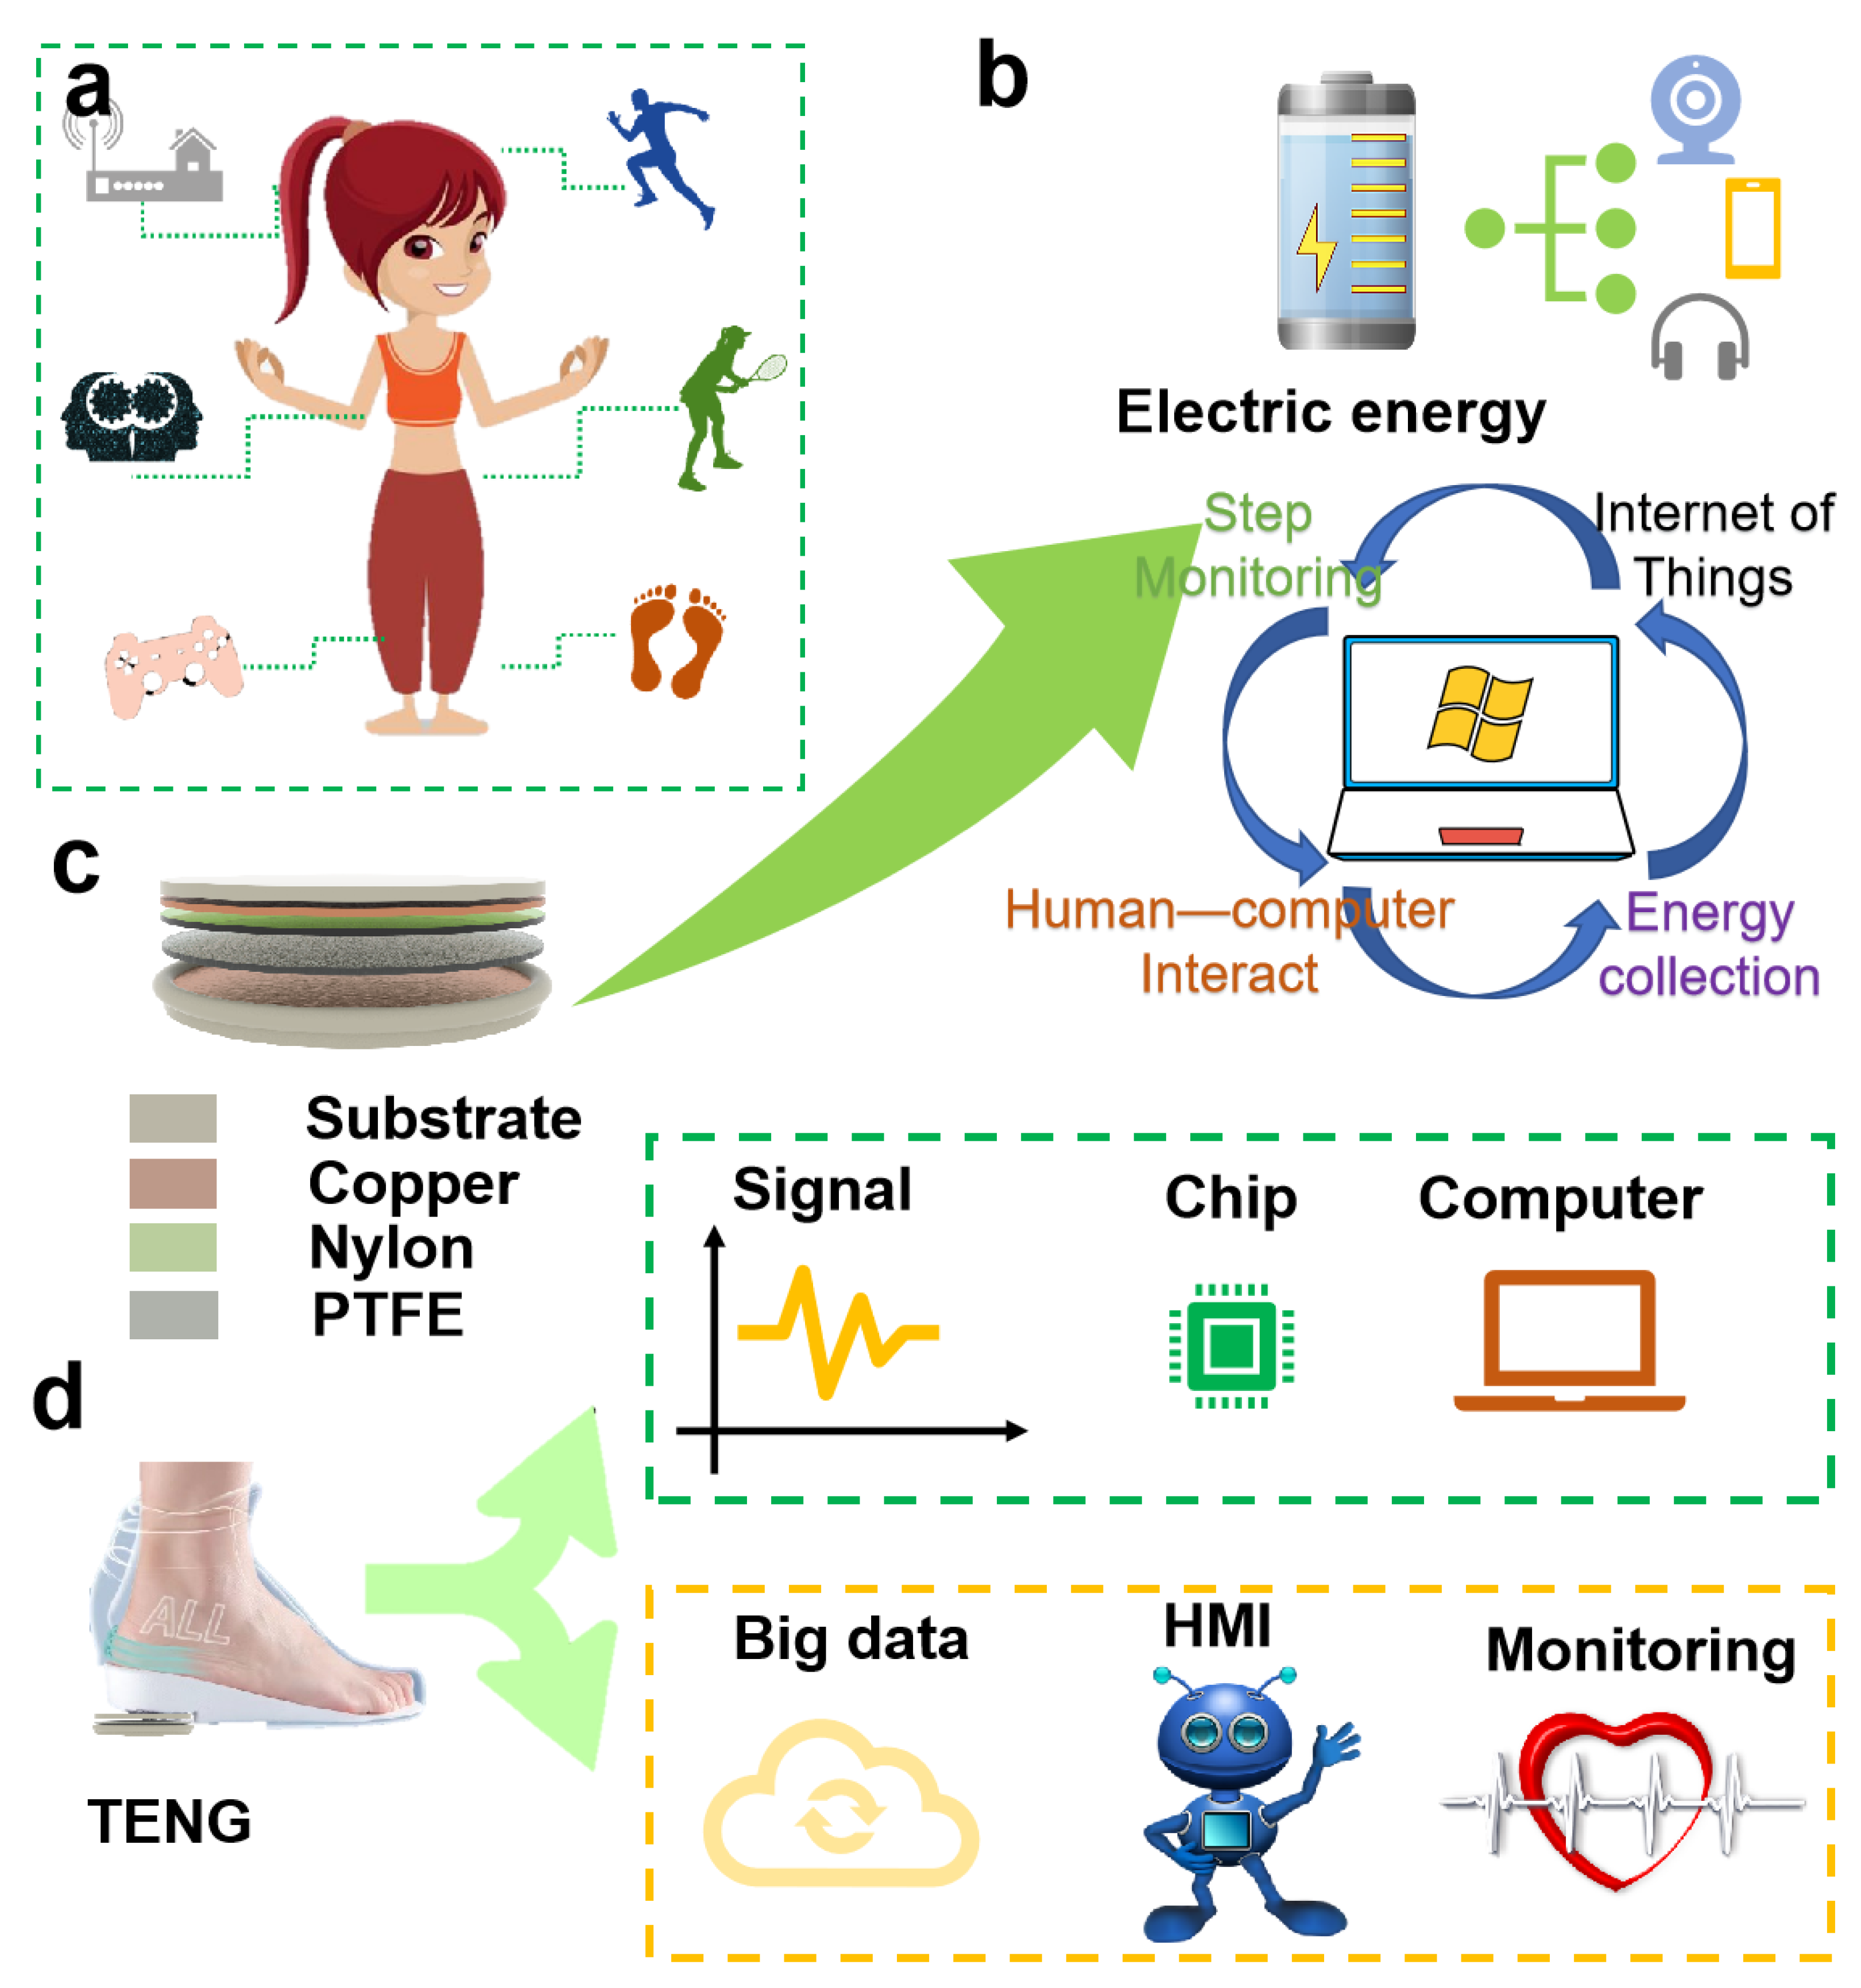 Future Clinical Applications of Wearable Technology